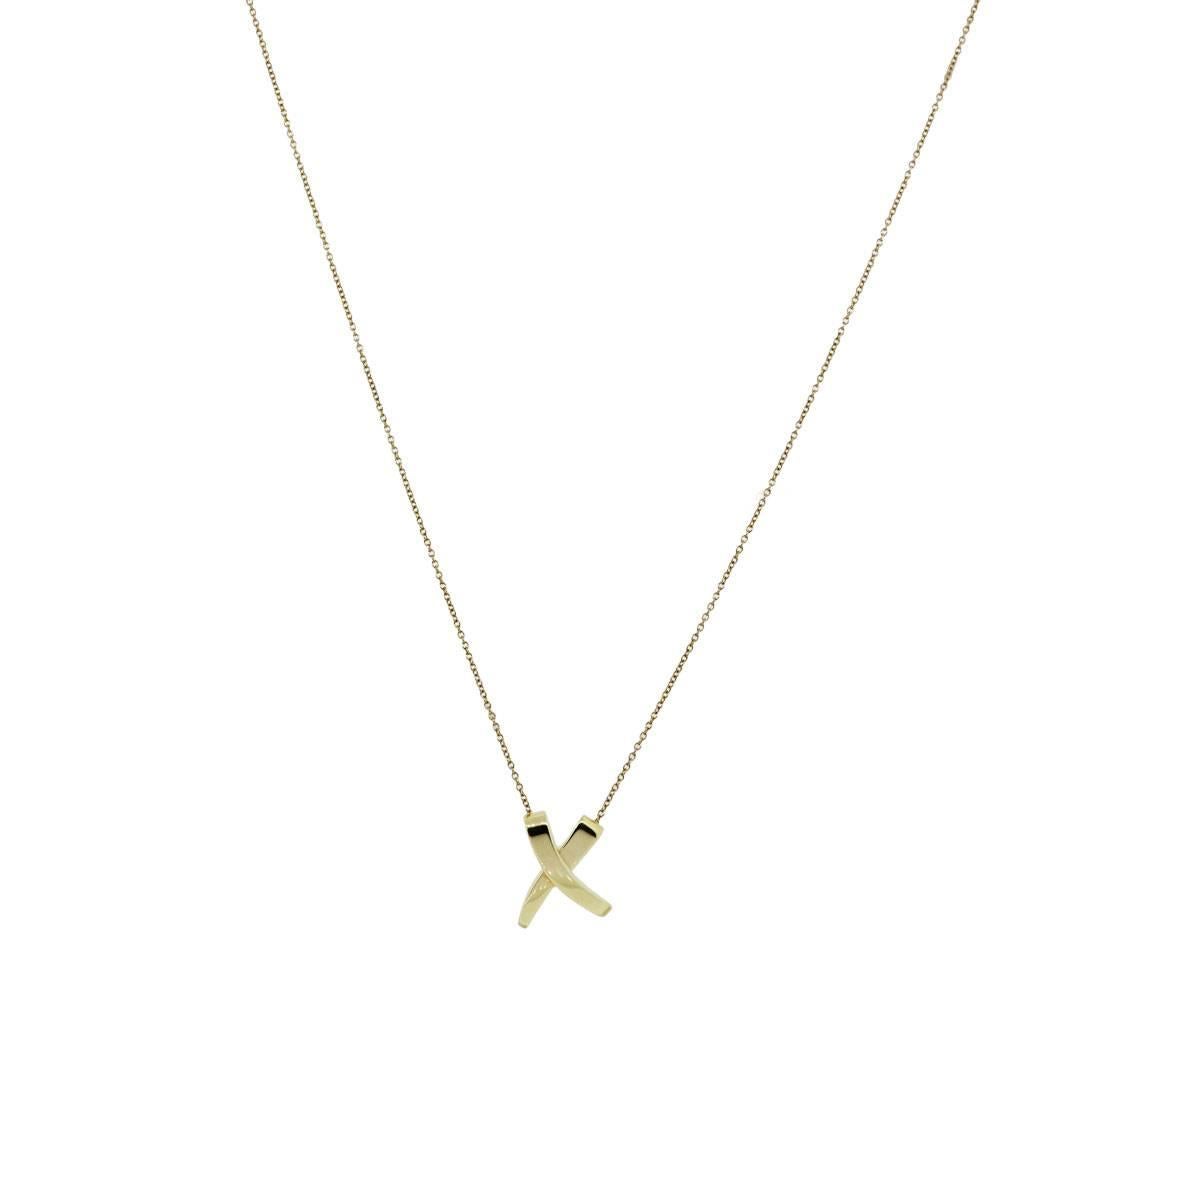 Style: Tiffany & Co. Paloma Picasso 18k Yellow Gold X Necklace
Material: 18k Yellow Gold
Total Weight: 3.6g (2.4dwt)
Necklace Length: Chain is 16.50